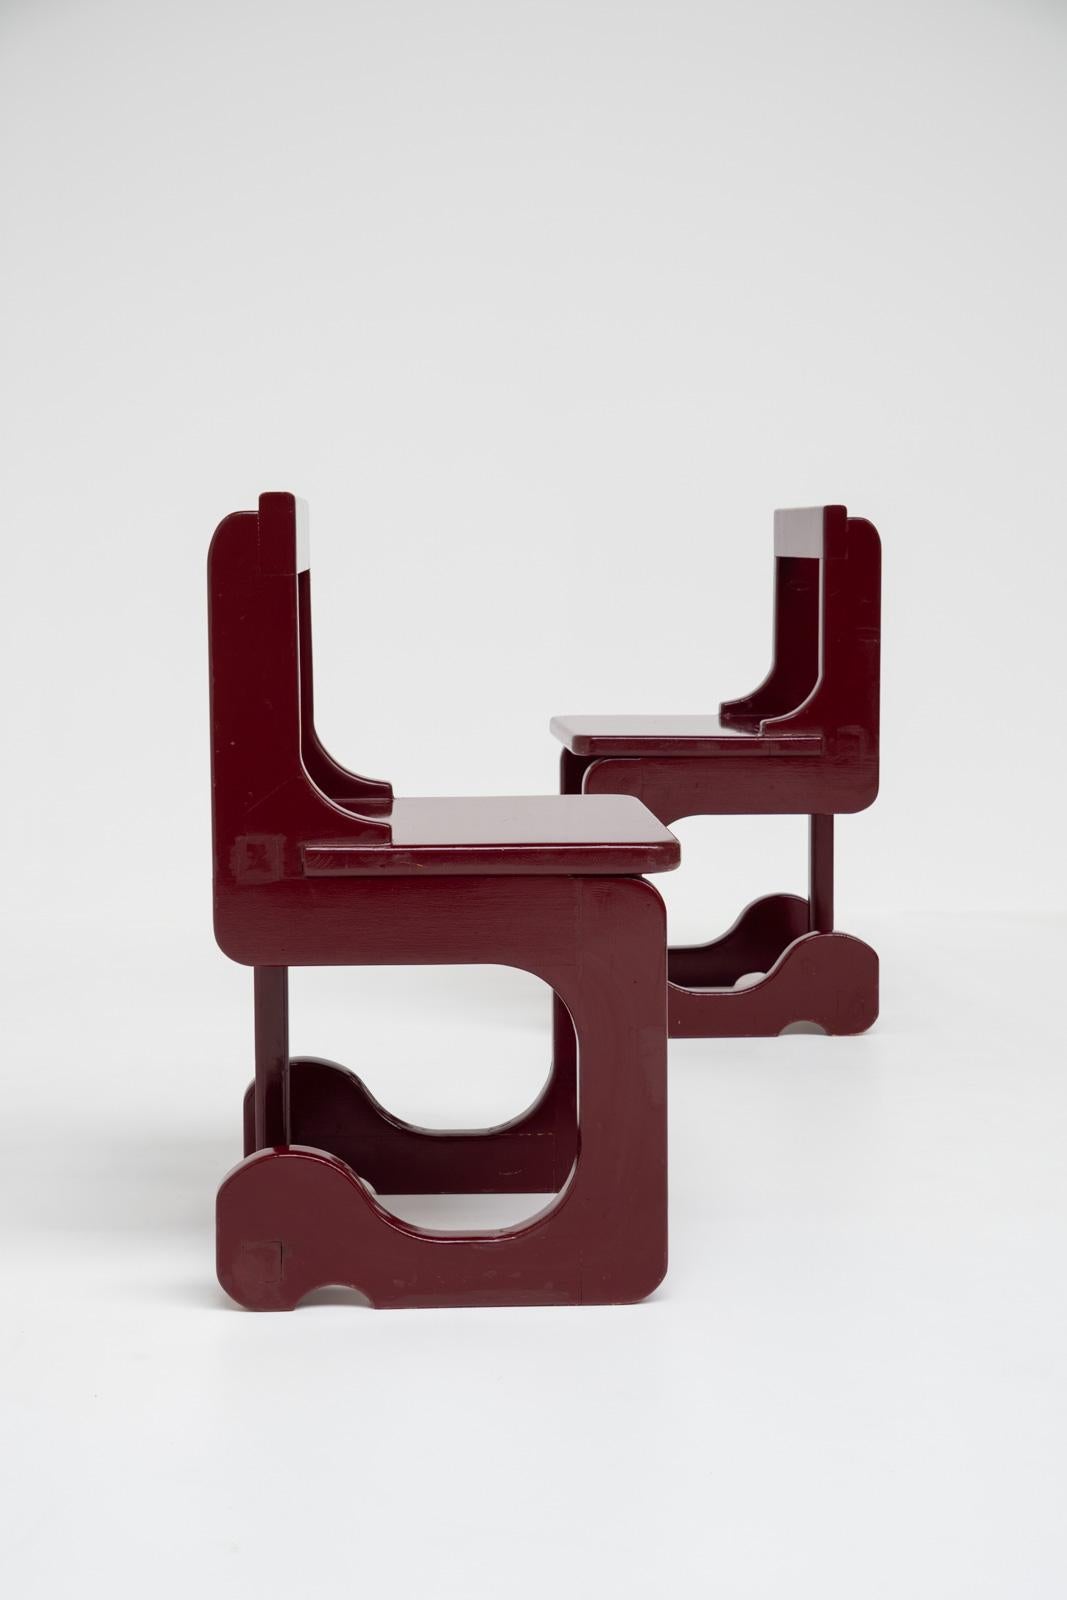 Pair of Handcrafted Maroon Chairs, Italy, 1970s For Sale 1